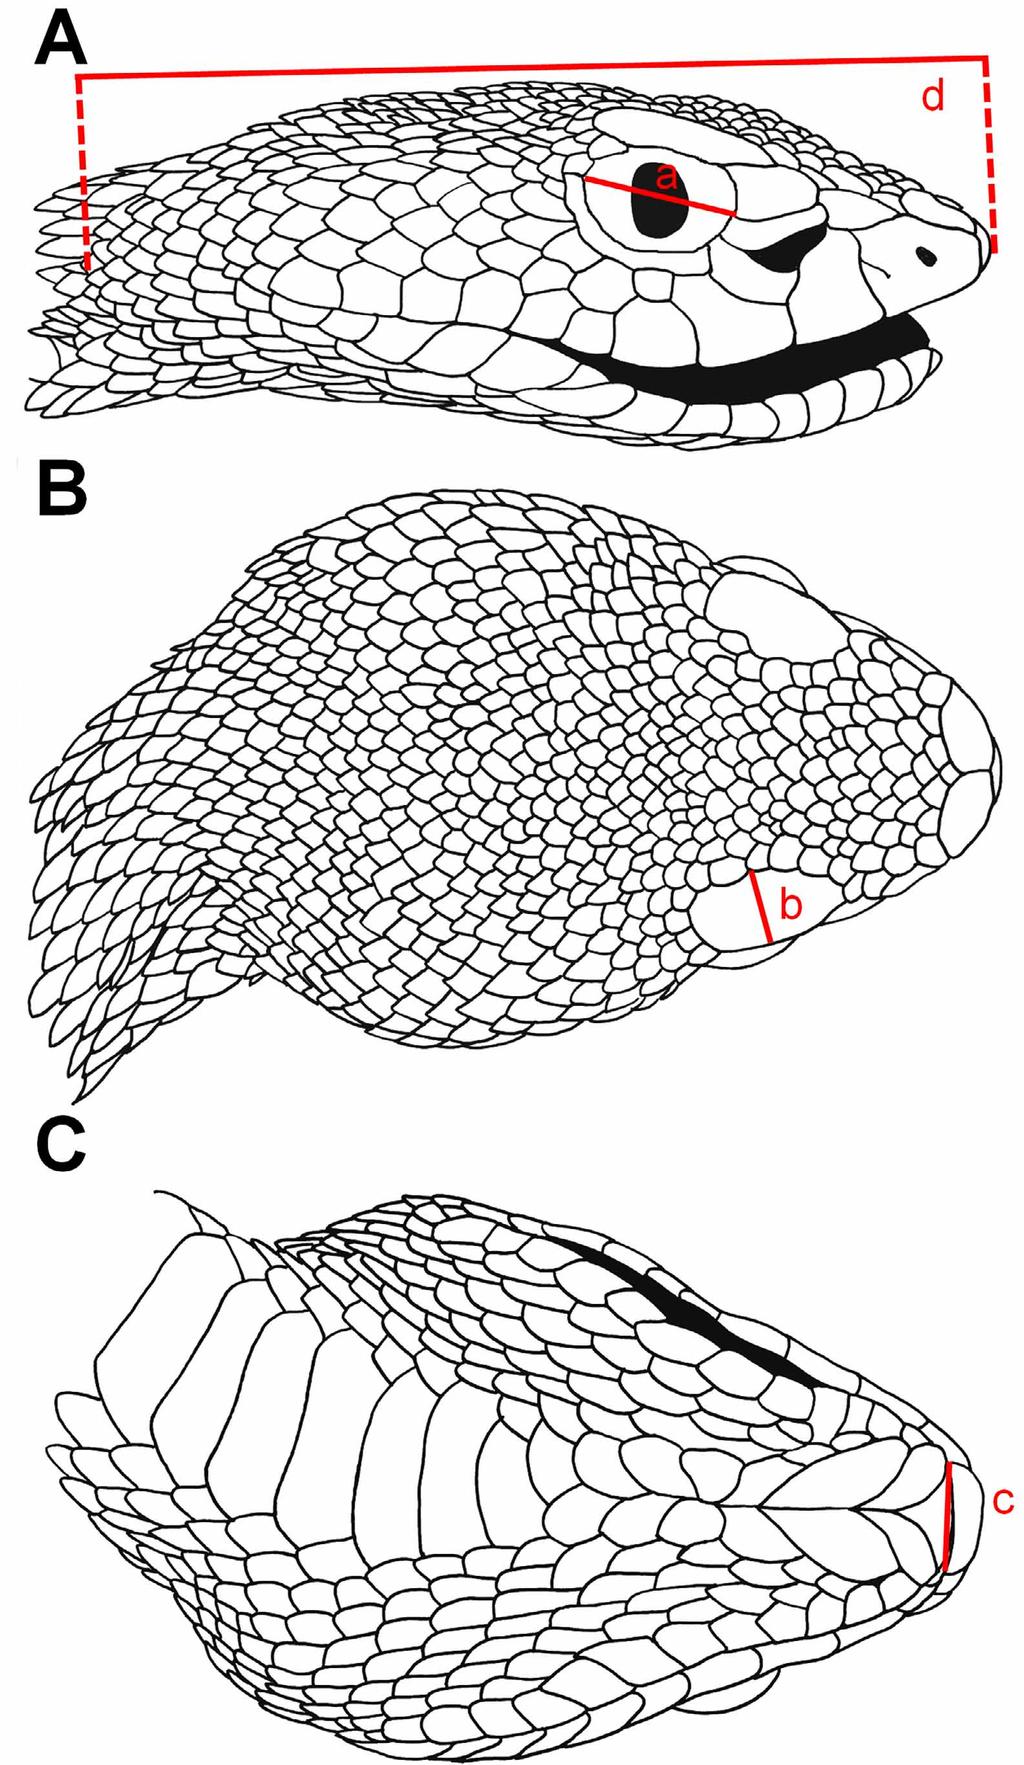 FIGURE 7. Line drawings of the head scalation of the holotype of Cryptelytrops macrops s. s. (MHNG 1400.85).